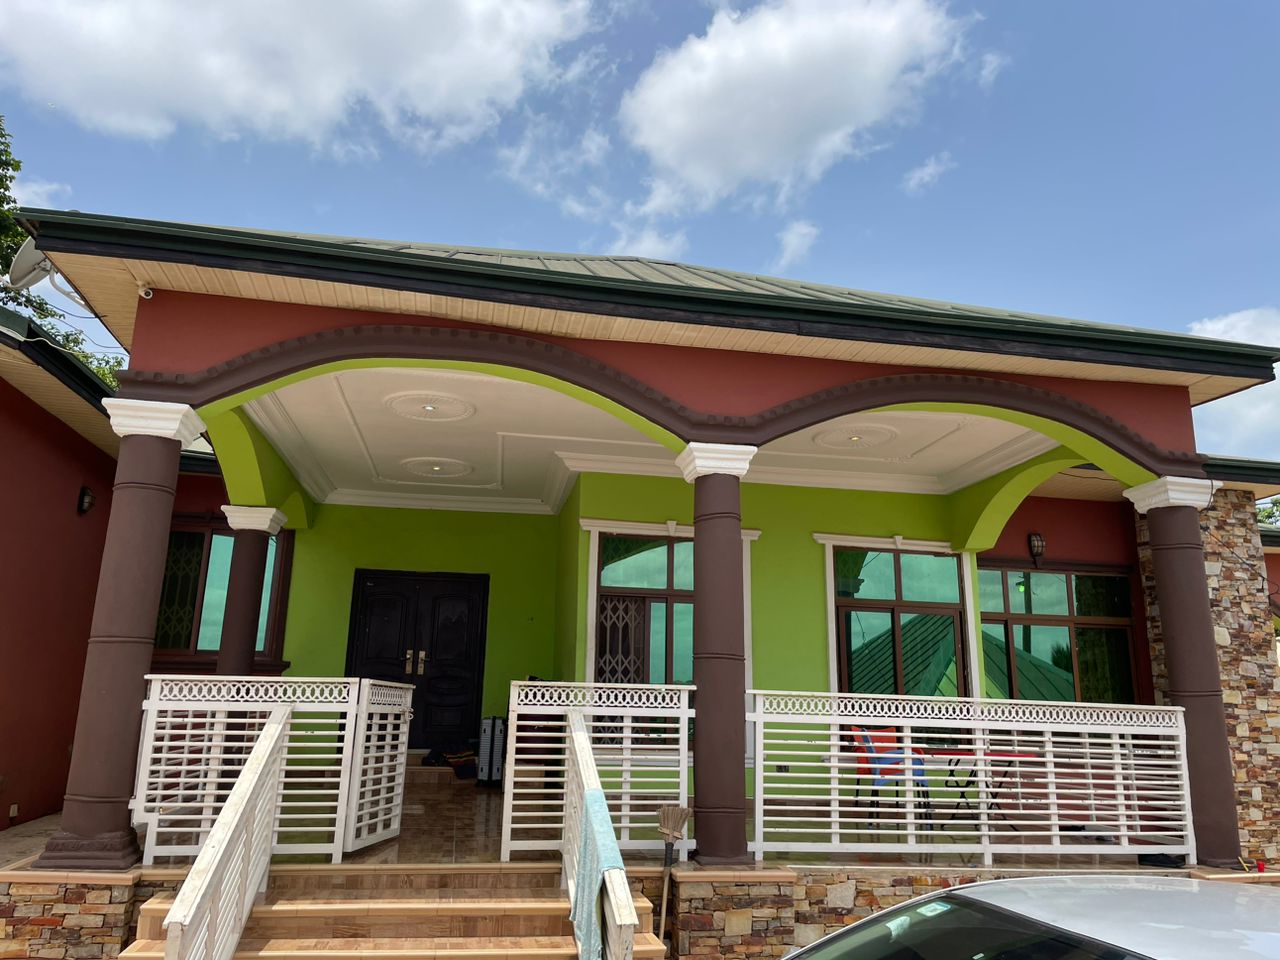 Five (5) Bedrooms House for Sale at Ampabame Number Two (2) - Kumasi